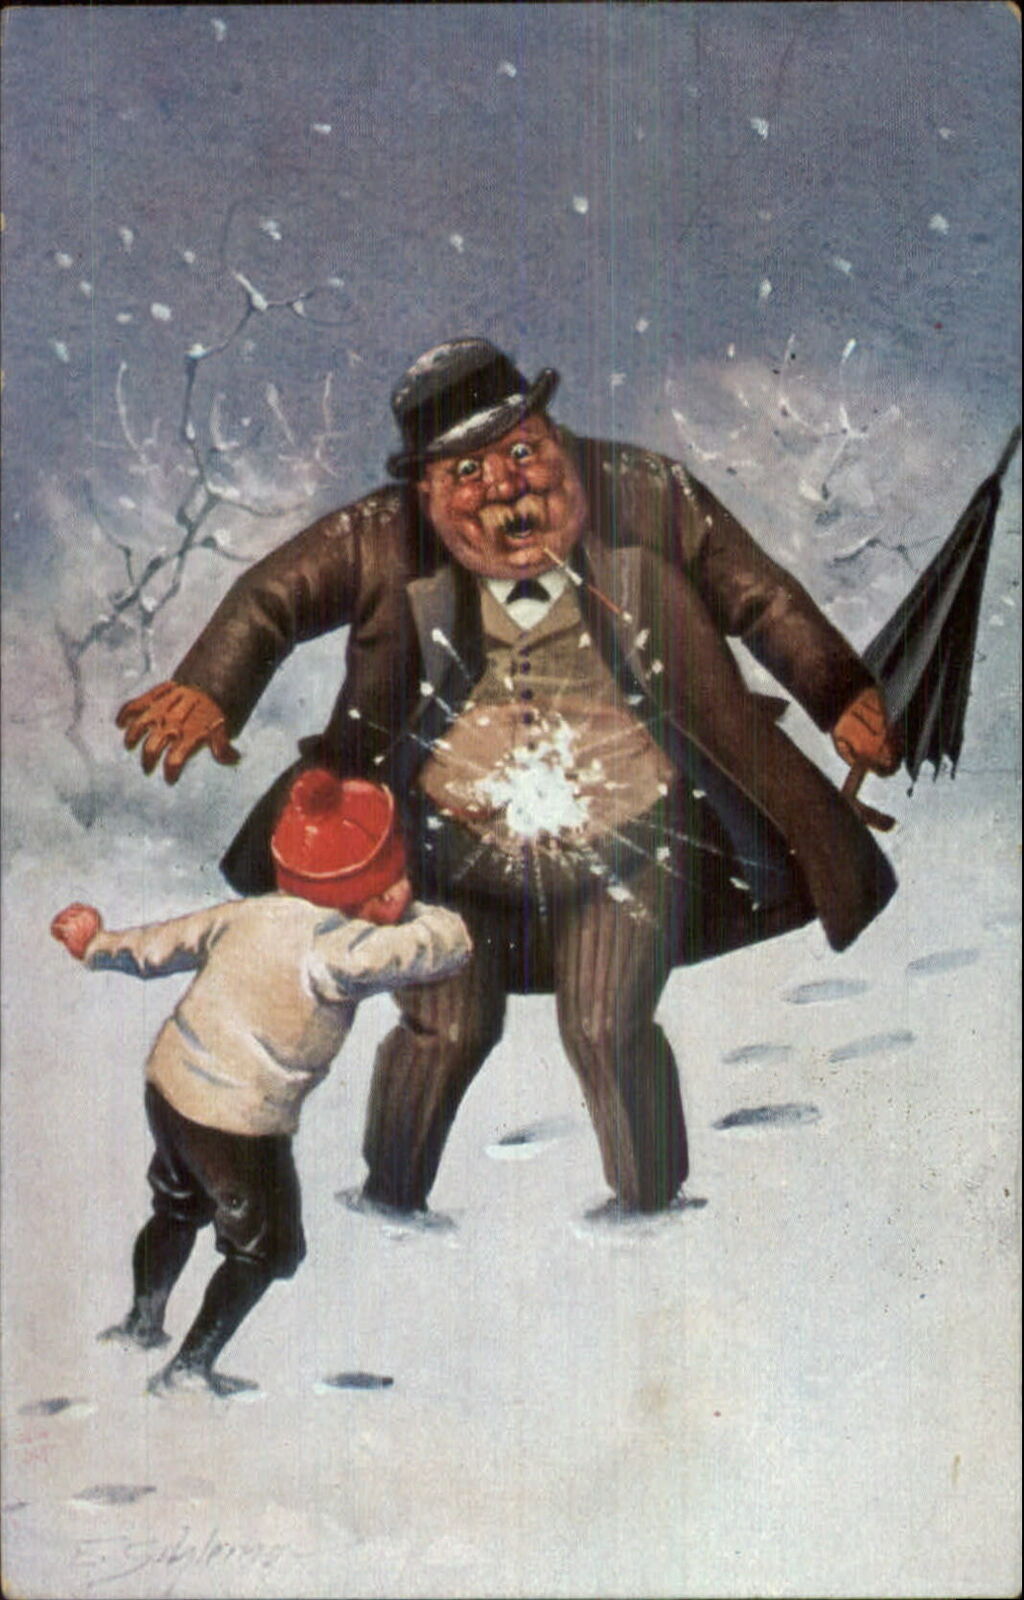 Boy Hits Fat Obese Man in Stomach w/ Snowball c1910 Postcard